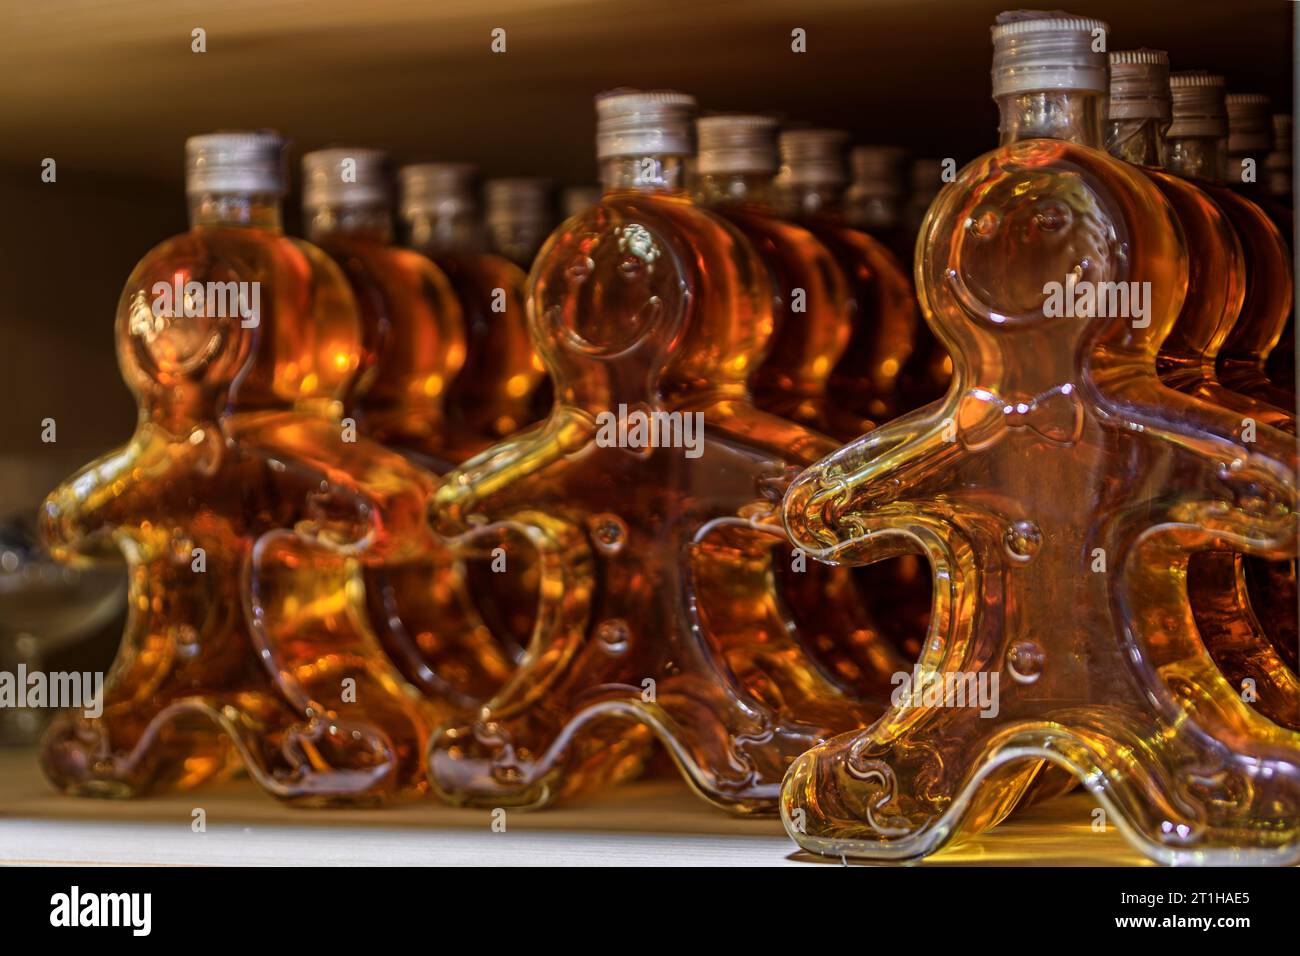 Traditional artisanal gingerbread liquor on display at a store in the Carre d'Or, the historic center of Strasbourg, Alsace, France Stock Photo